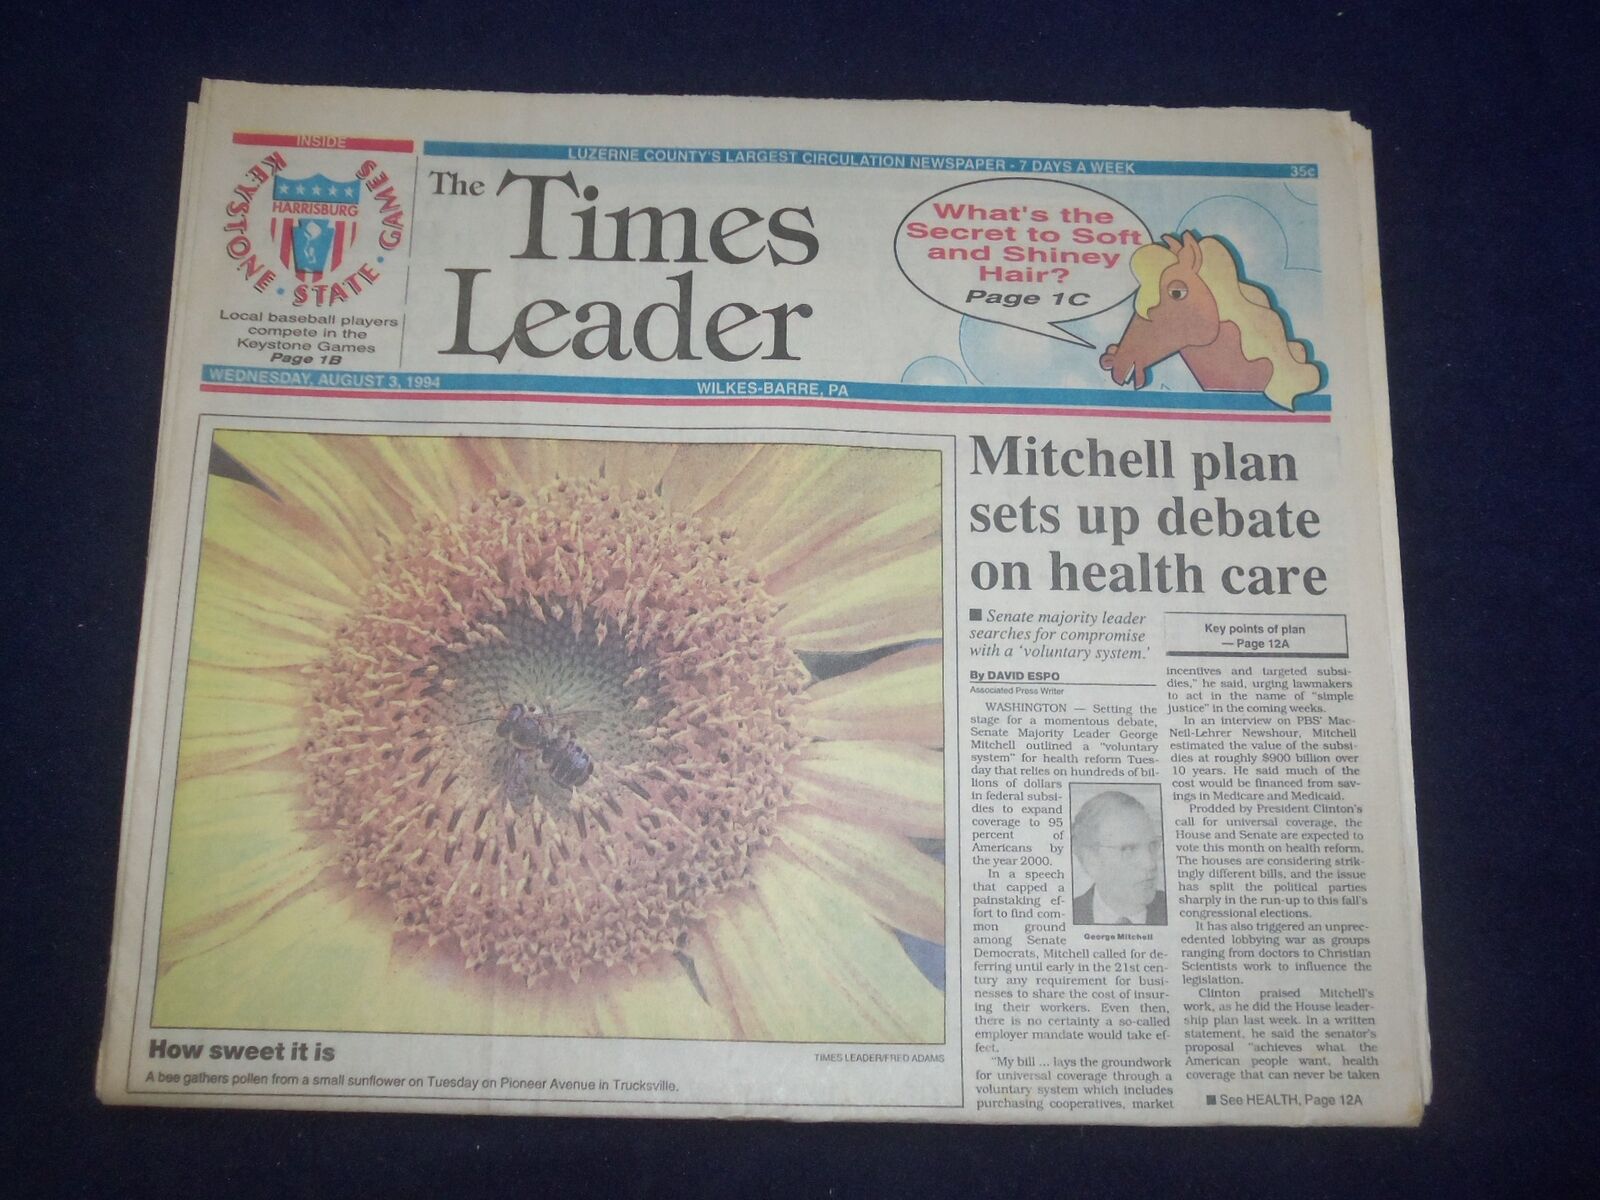 1994 AUG 3 WILKES-BARRE TIMES LEADER - MITCHELL DEBATE ON HEALTH CARE - NP 8120